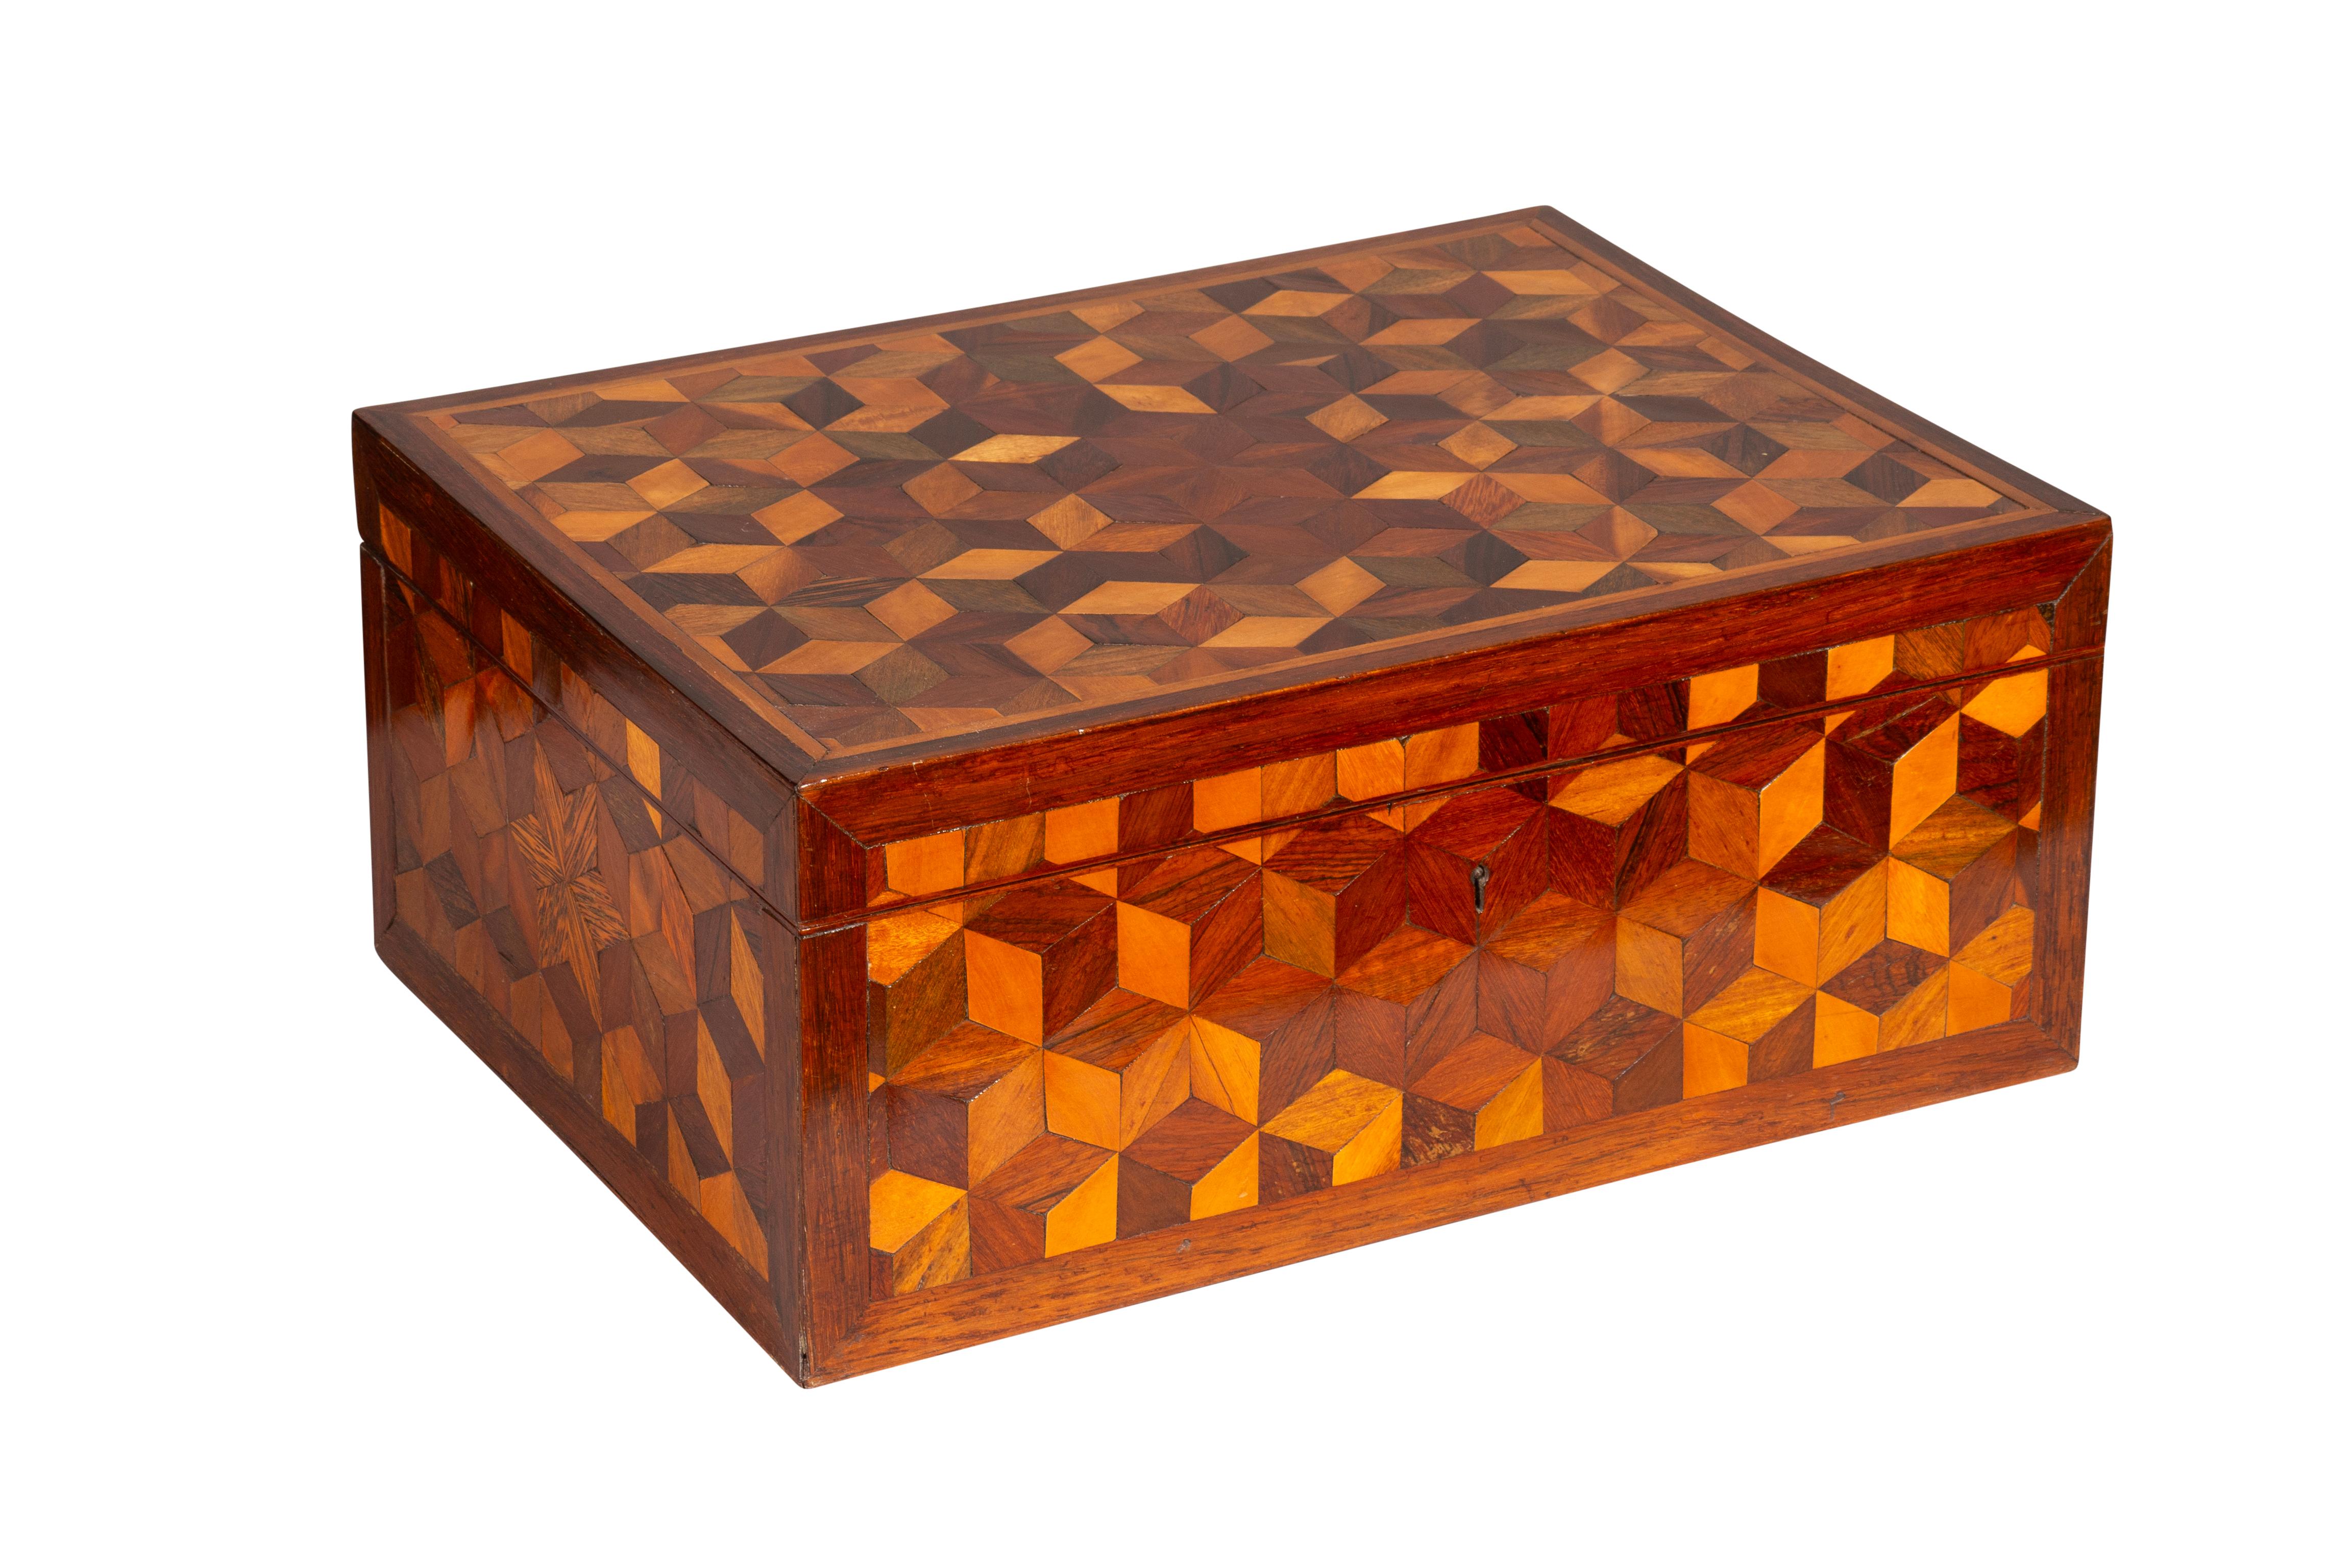 Rectangular with overall cube parquetry. Lift top. Well executed with a wide choice of exotic woods.Nice patina and presents well. From the estate of the founder of Yankee Candle Company.